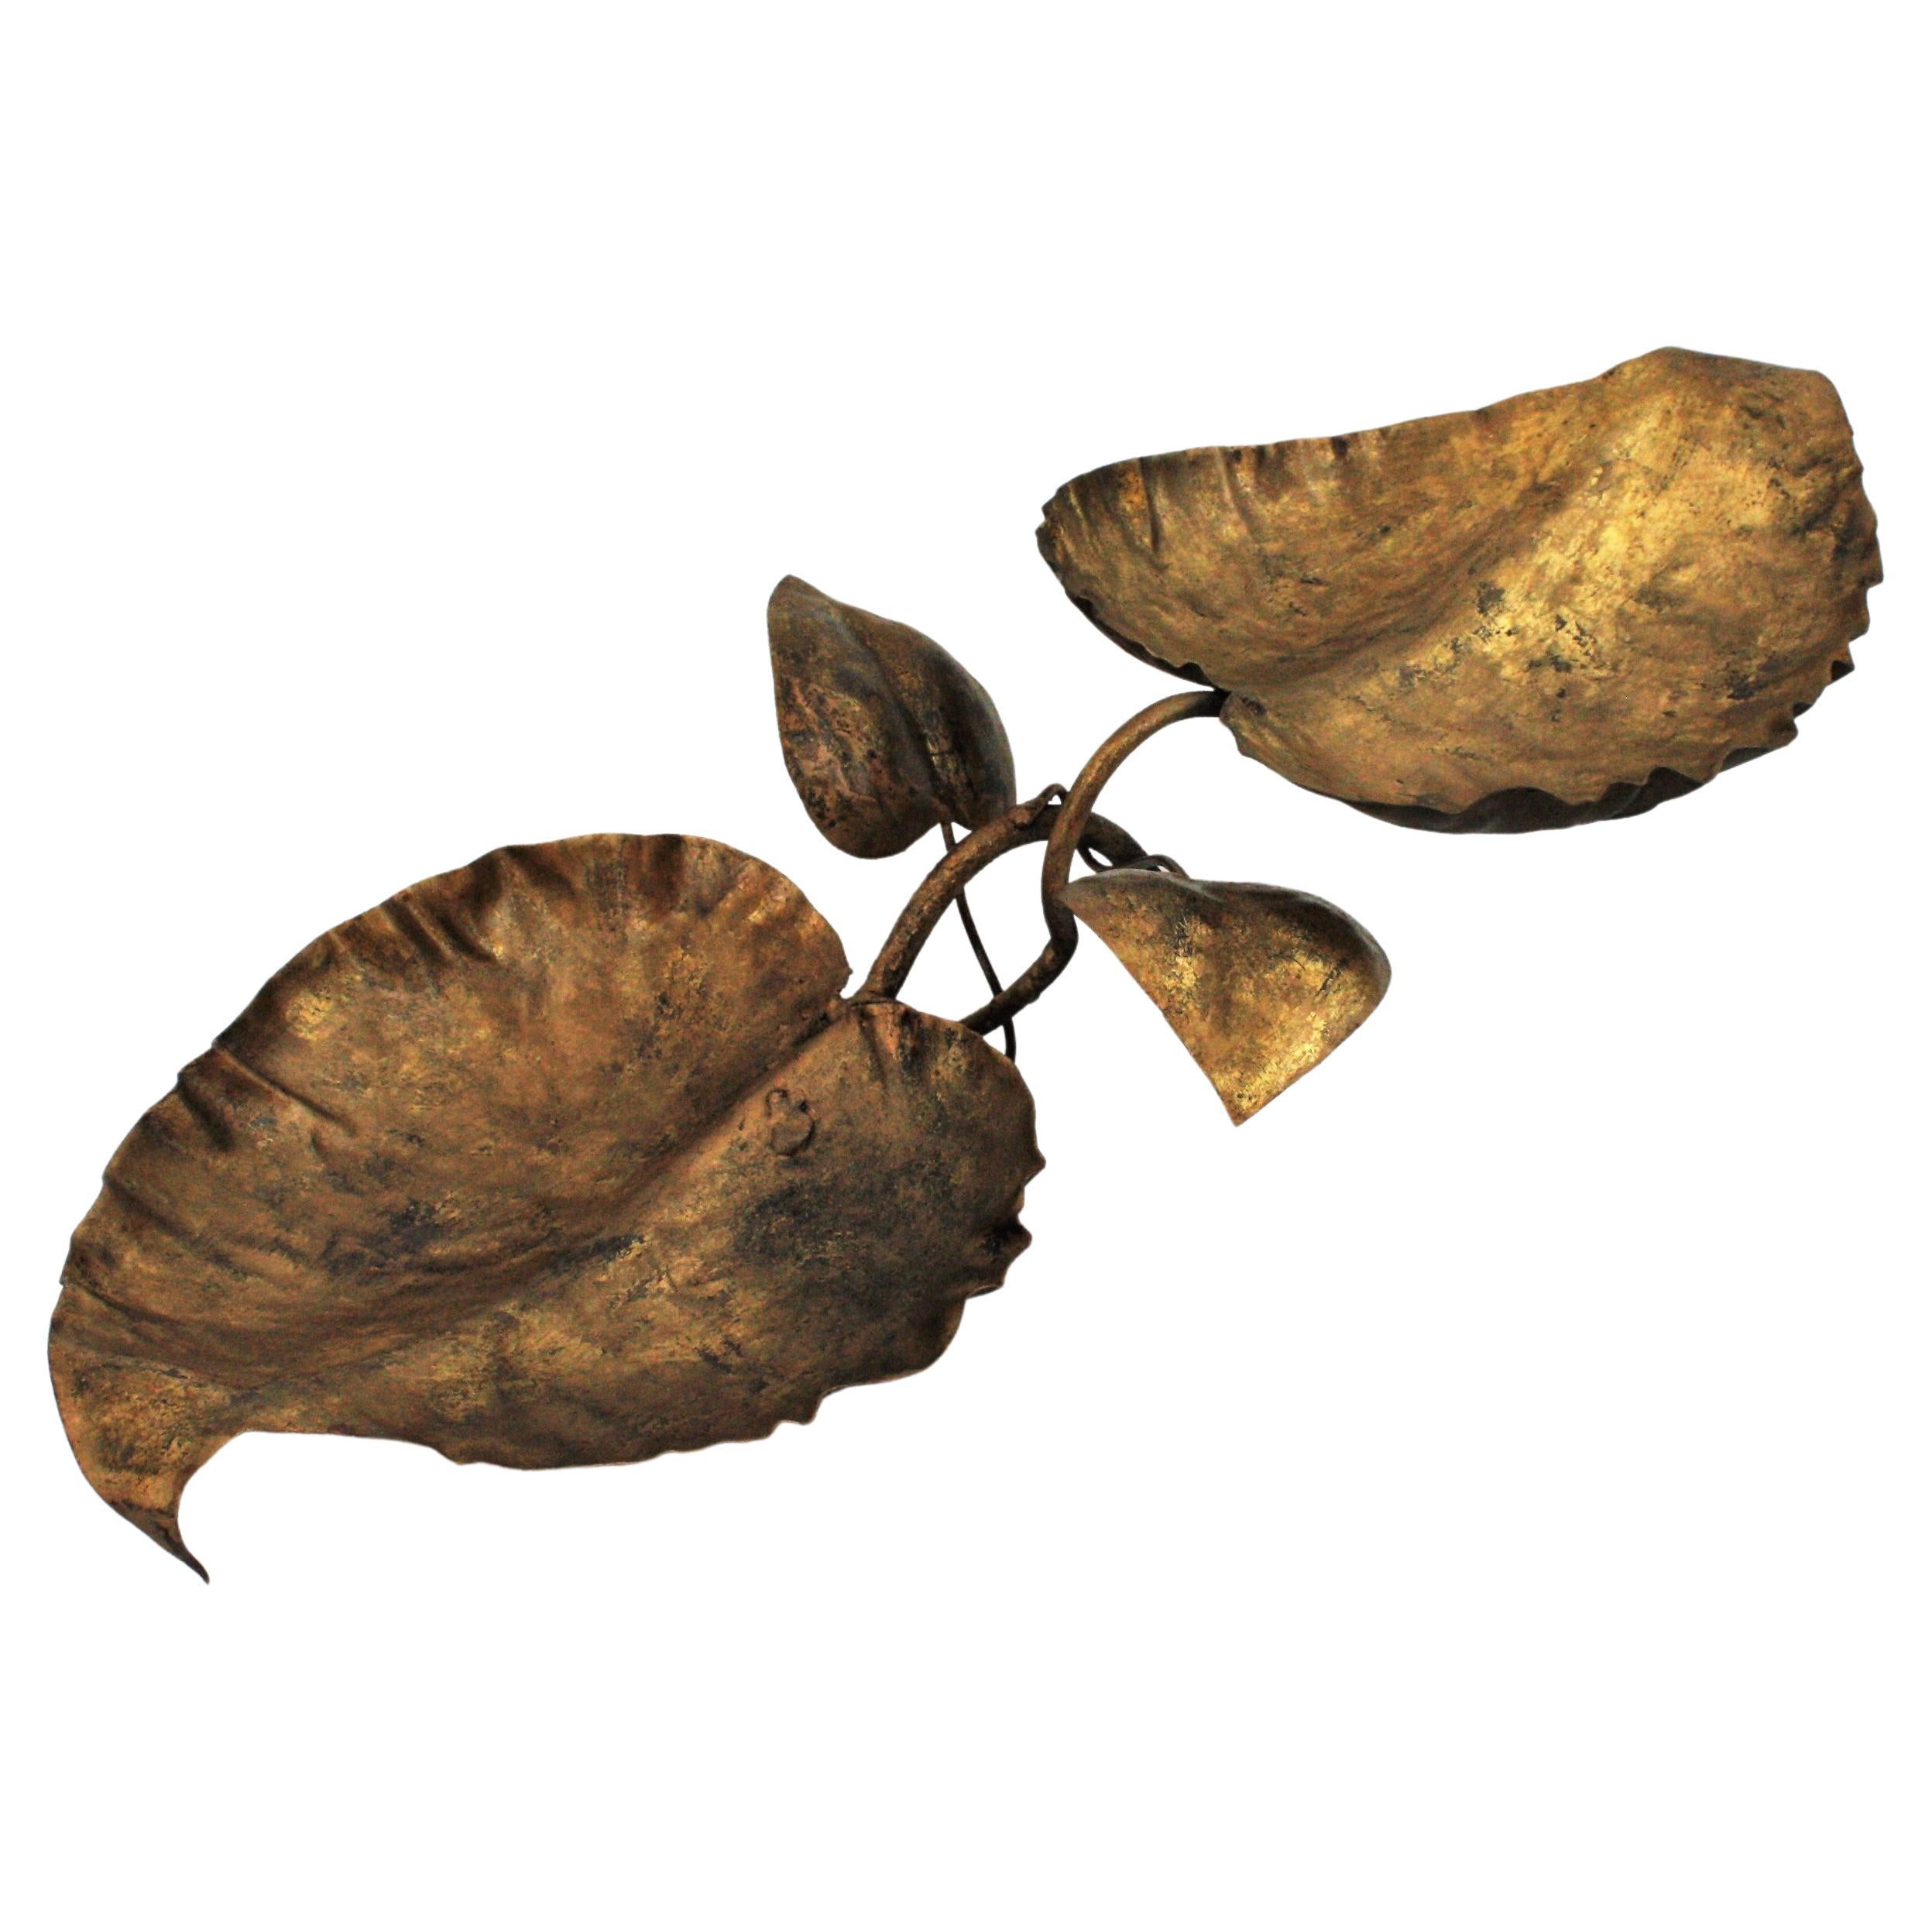 Hollywood Regency Foliage centerpiece in gilt iron, France, 1950s.
One of a kind decorative handcrafted centerpiece featuring two branches holding two large leaves as platters or vide-poches and two smaller leaves as decorative details.
It has a